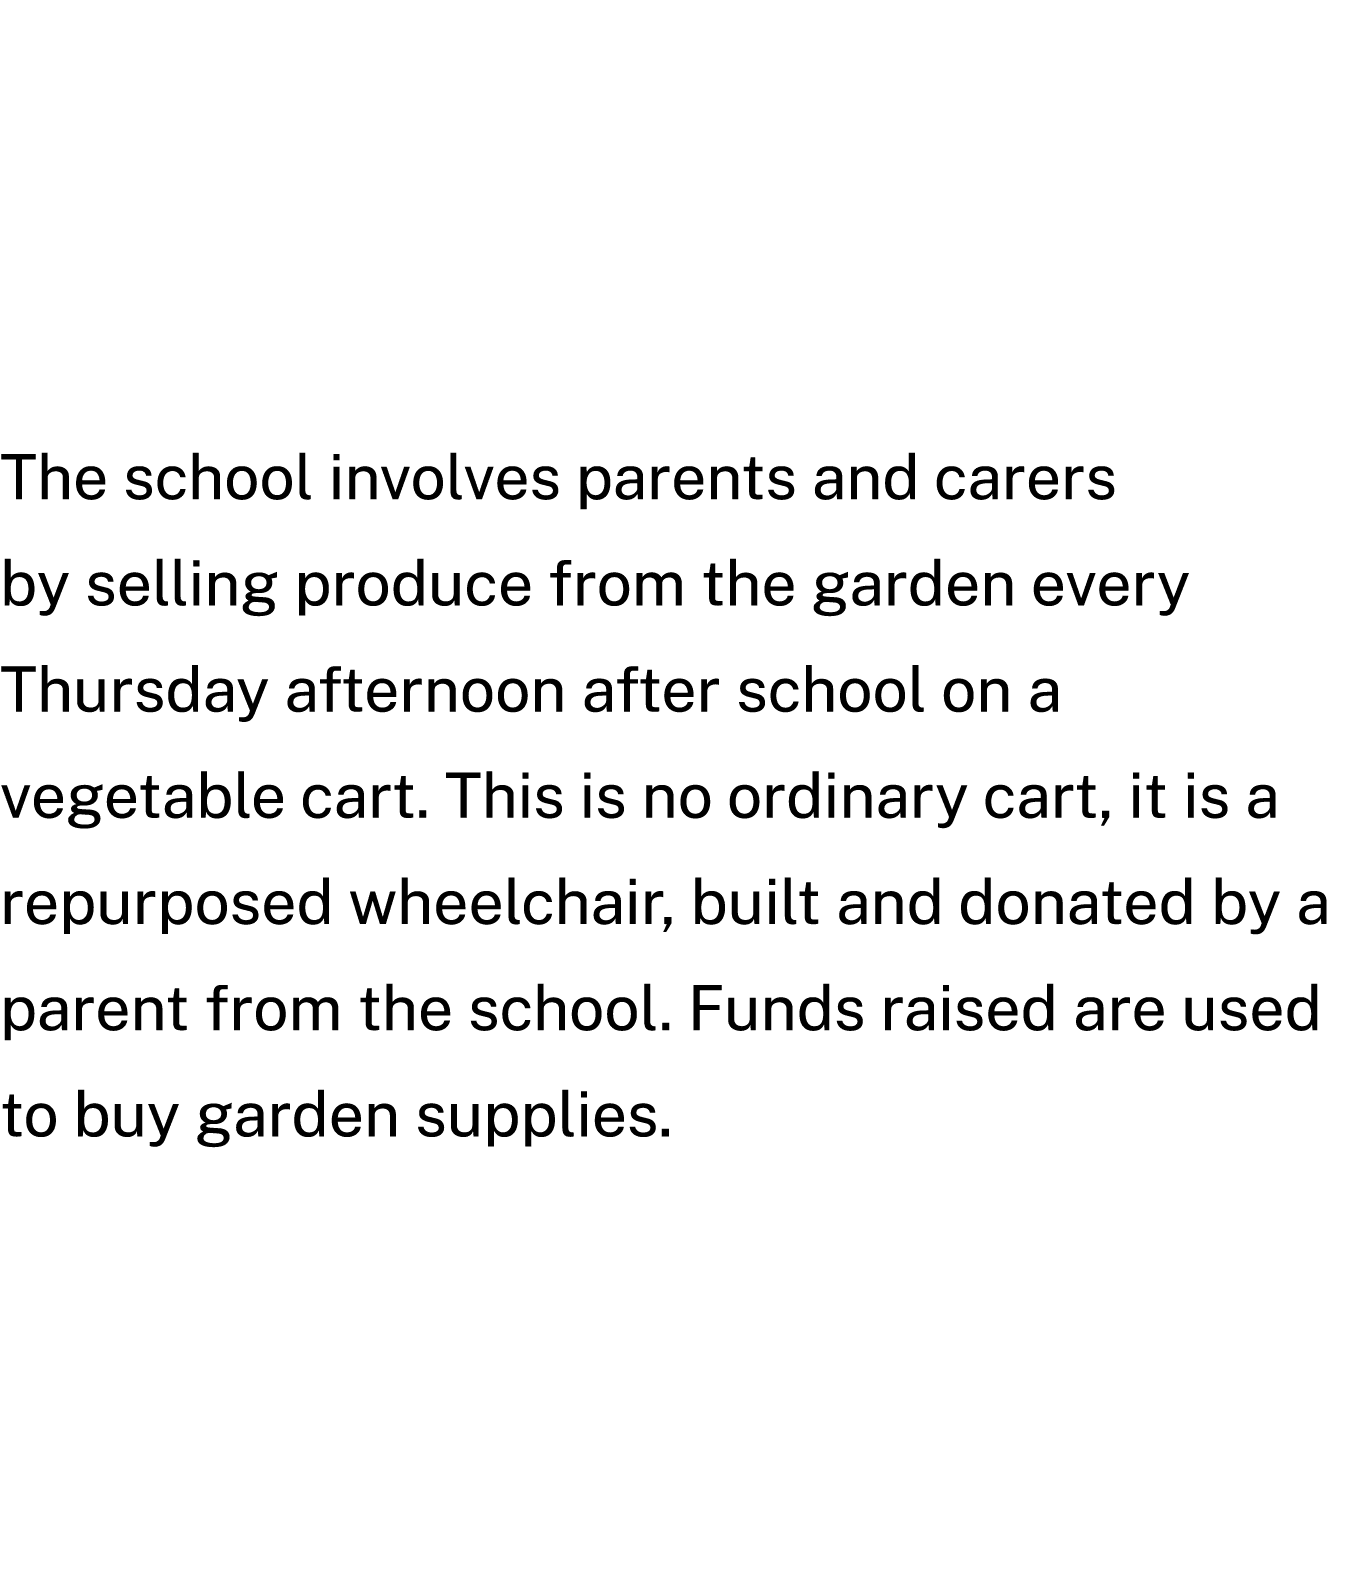 The school involves parents and carers by selling produce from the garden every Thursday afternoon after school on a ...